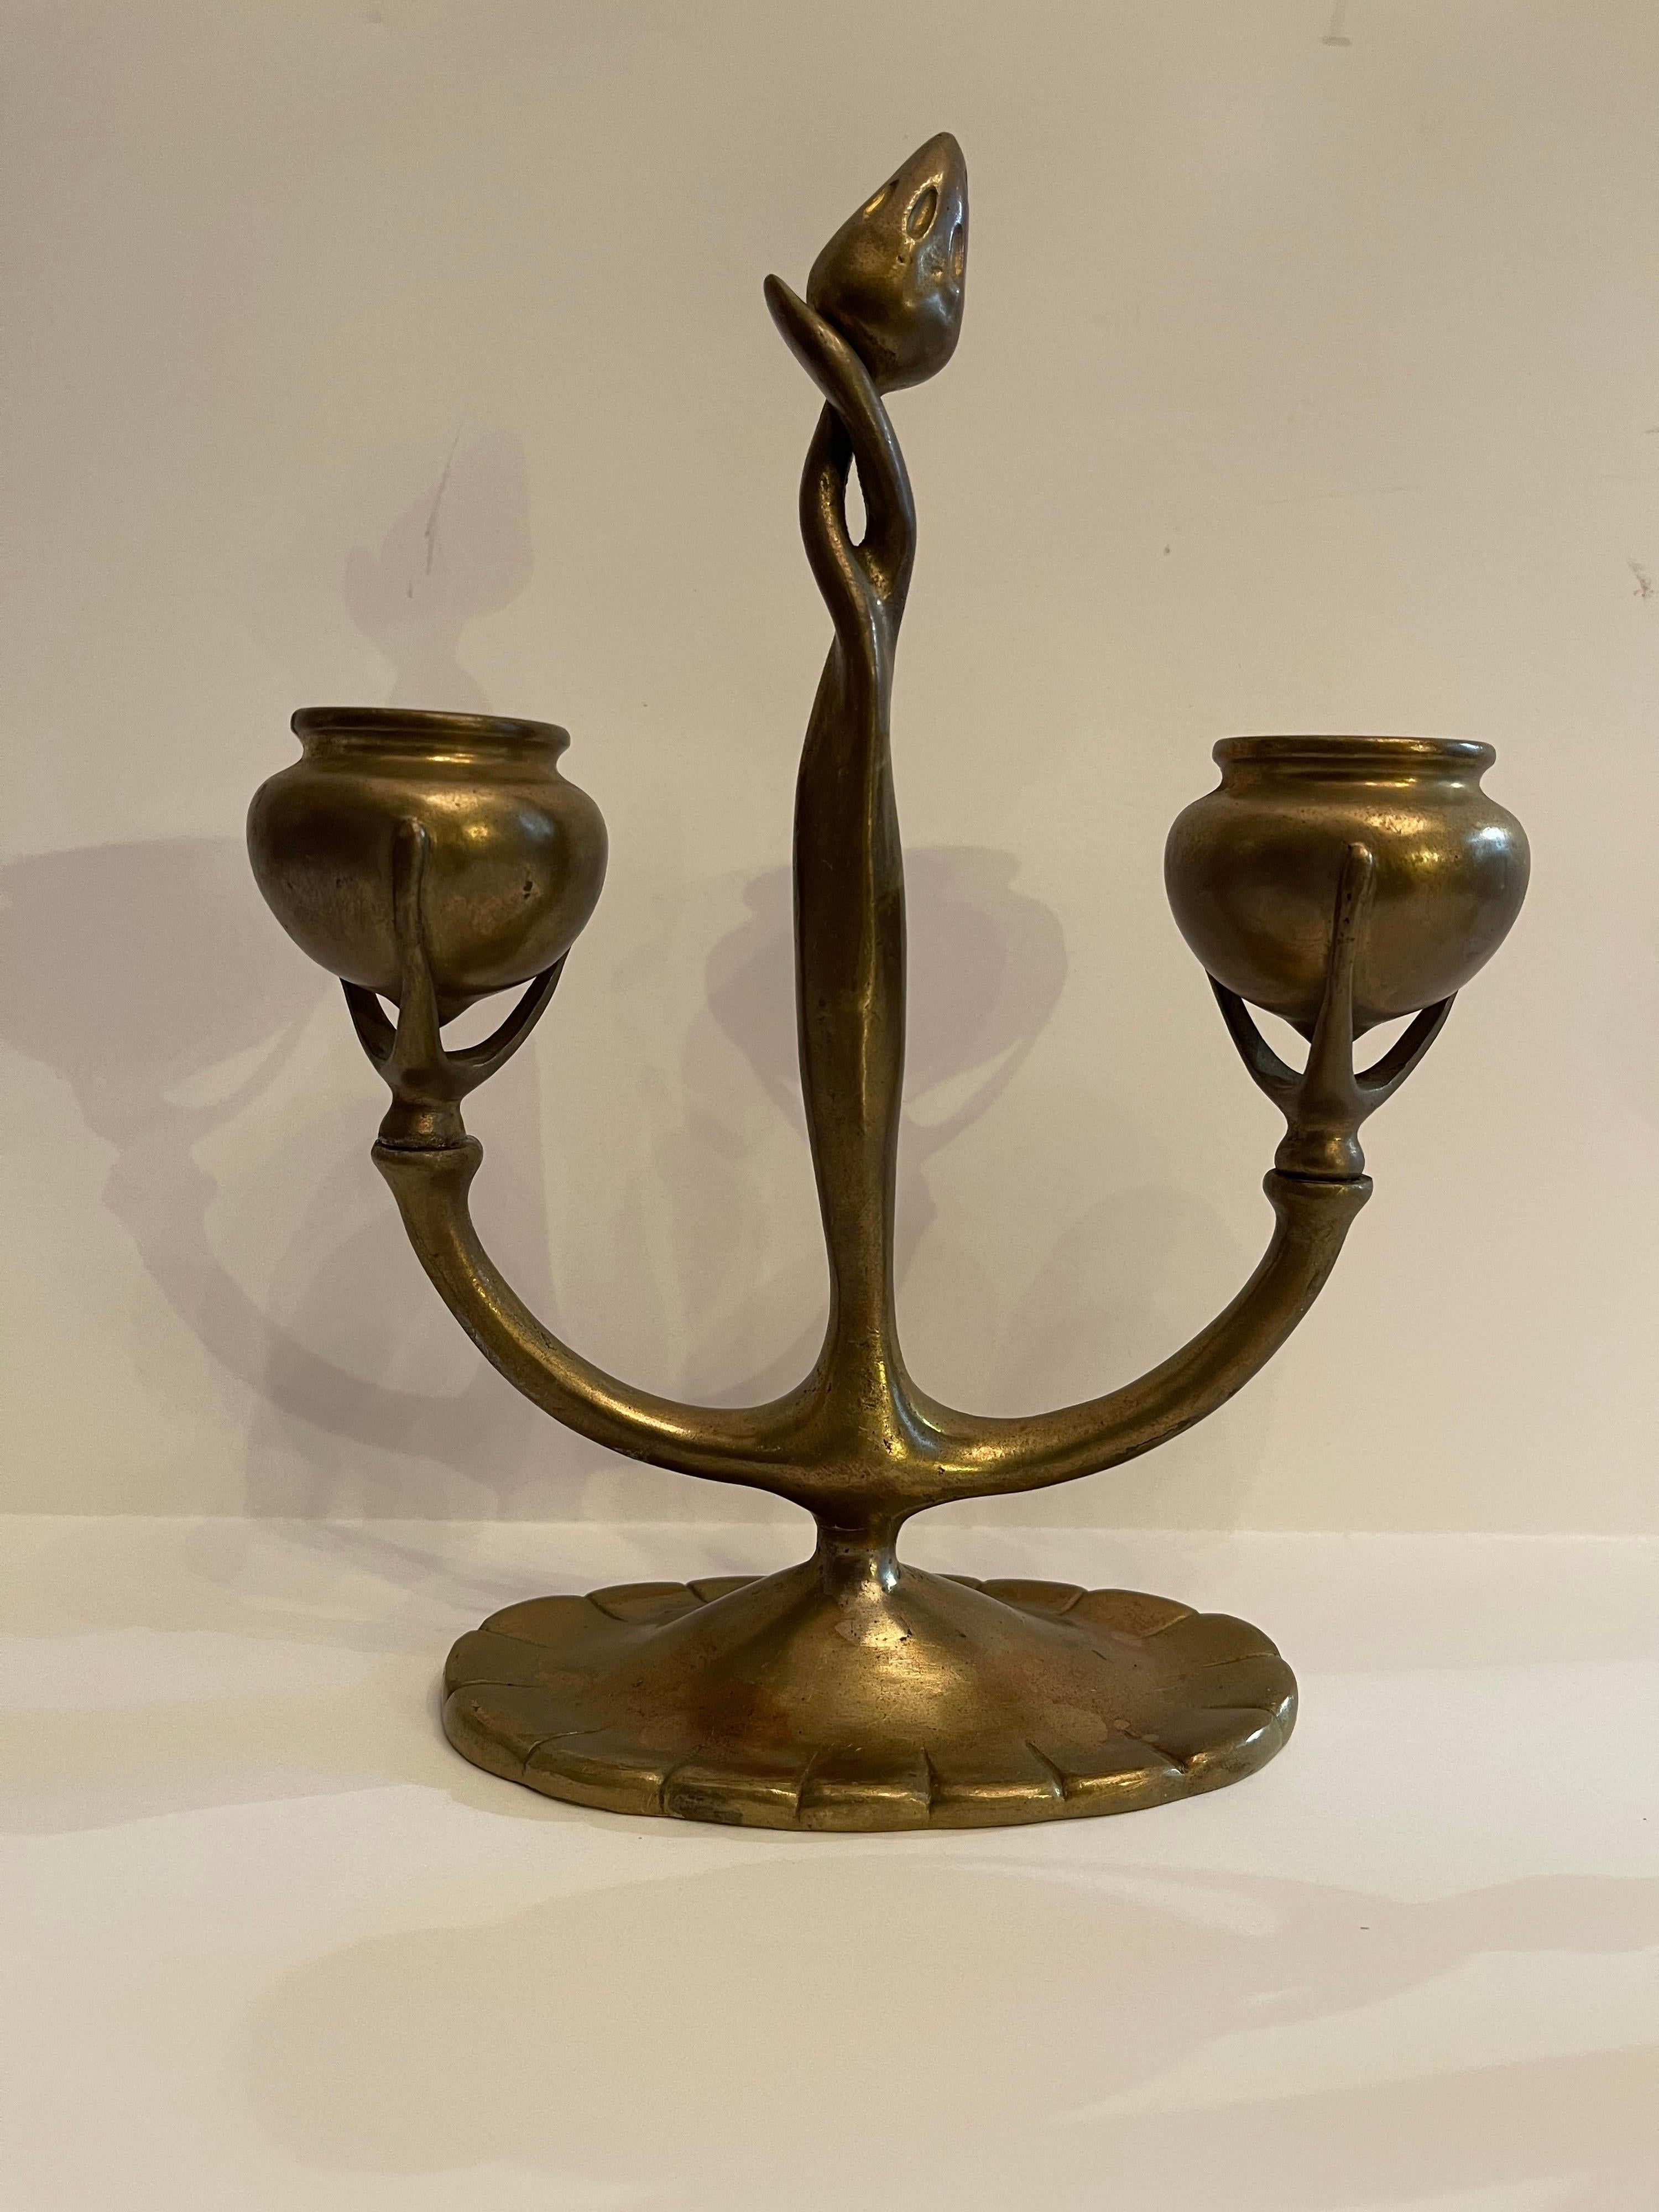 Wonderful Pair of Tiffany Studios Dore Bronze Art Nouveau Two Arm Candelabras In Good Condition For Sale In Roslyn, NY